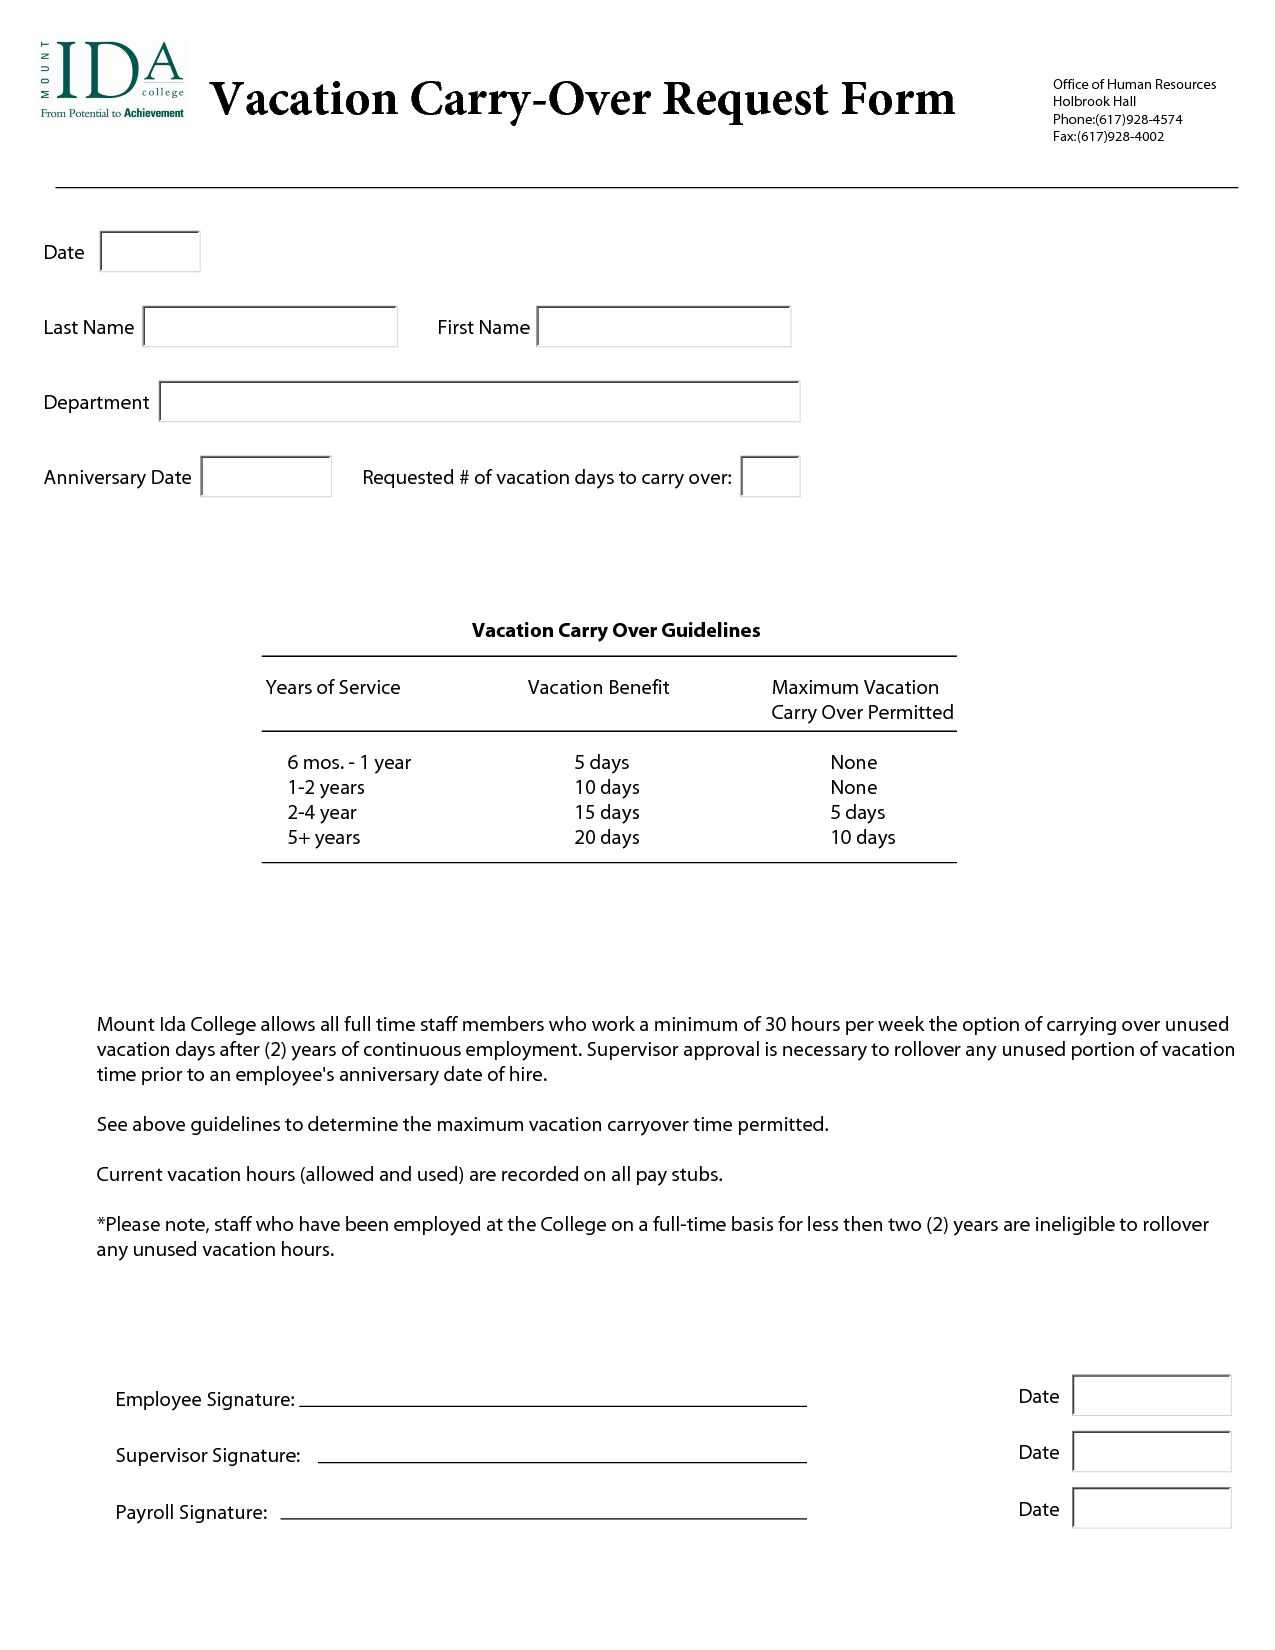 Travel Request Form Template Excel Or Annual Leave Request Throughout Travel Request Form Template Word